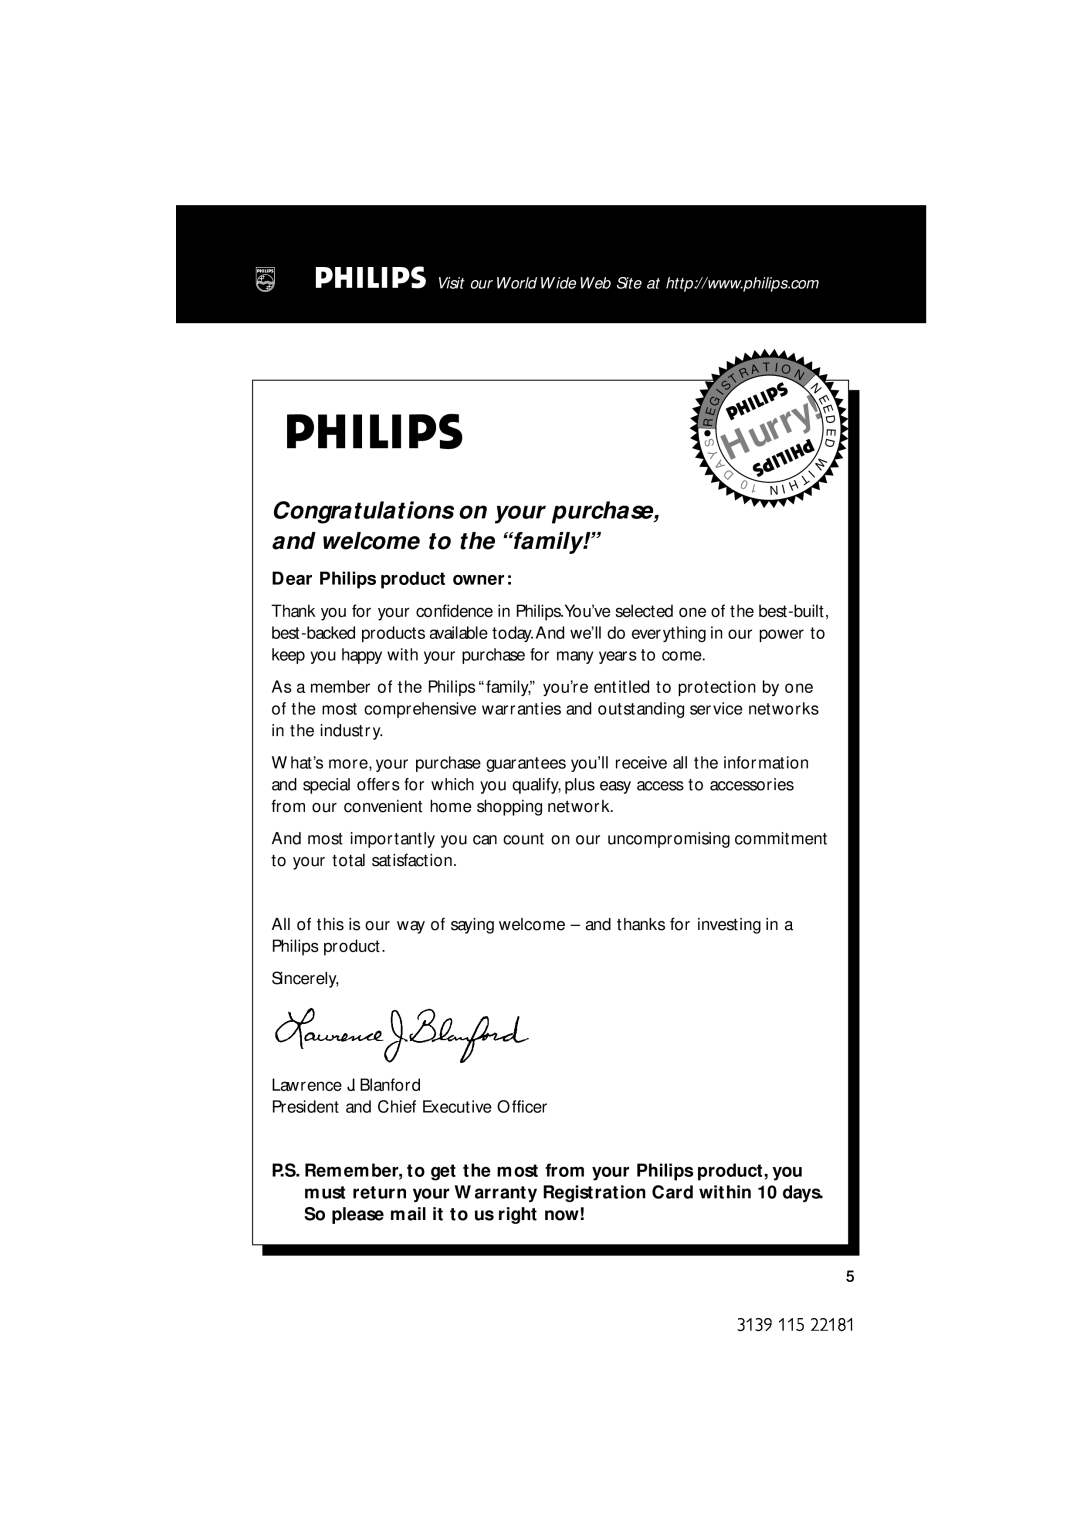 Philips MC-M570/37 warranty Dear Philips product owner, Hurry 